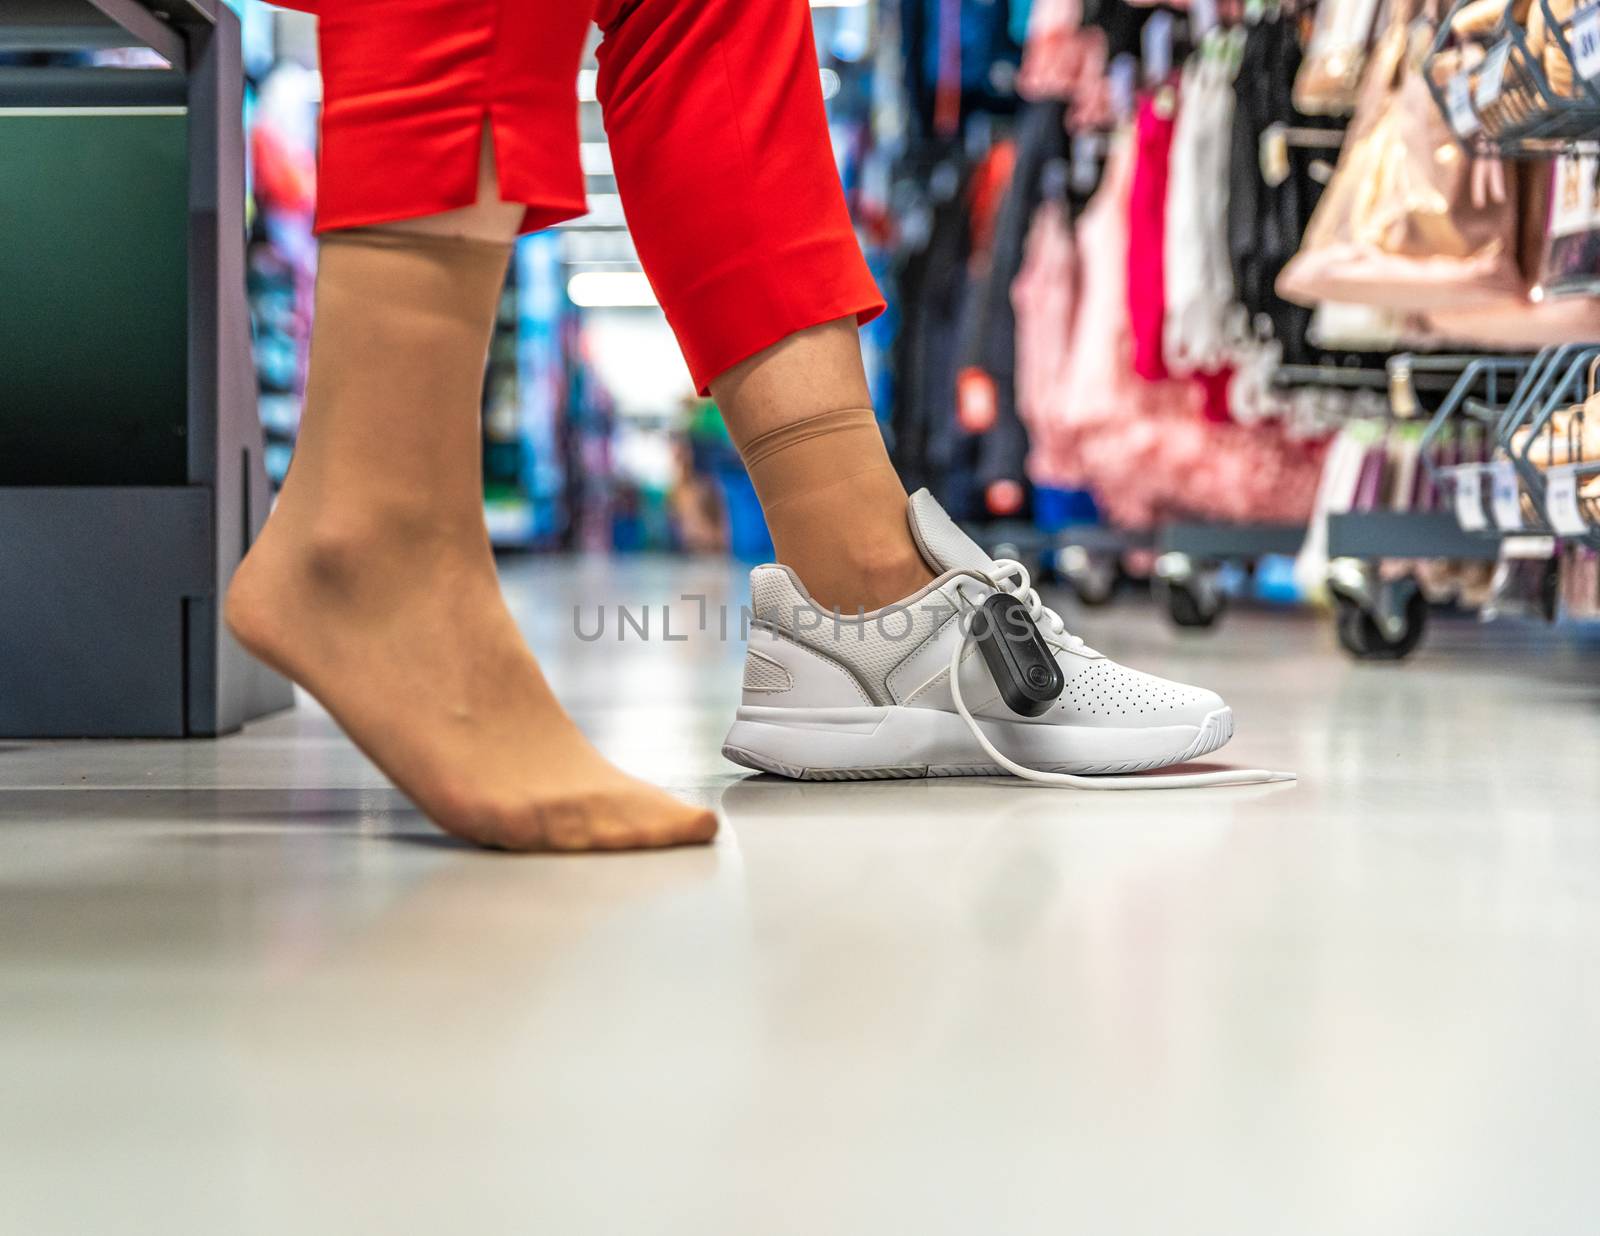 woman chooses and tries sports shoes in the store by Edophoto